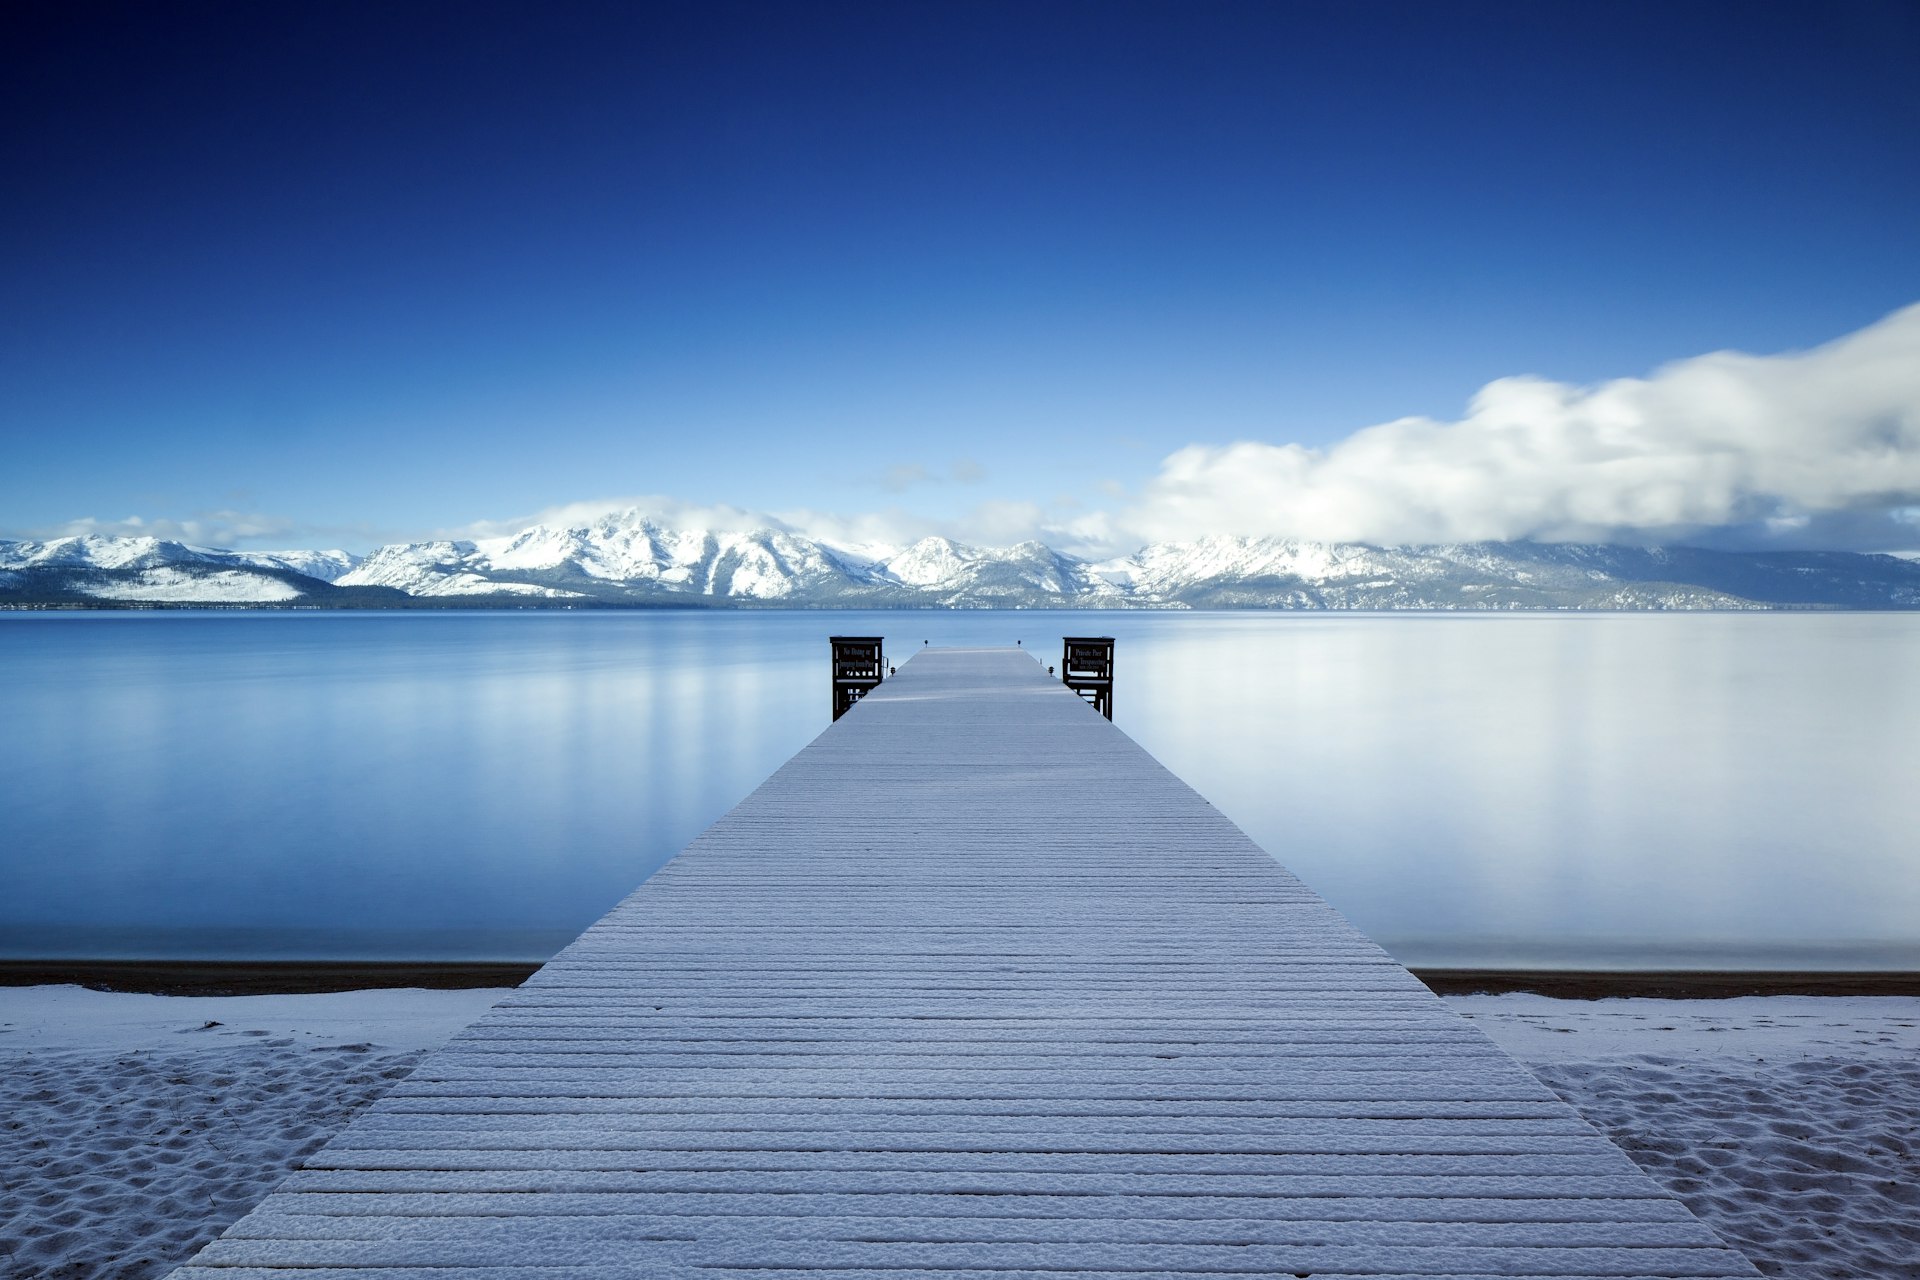 A dock protrudes into a flat lake with snowy peaks in the distance